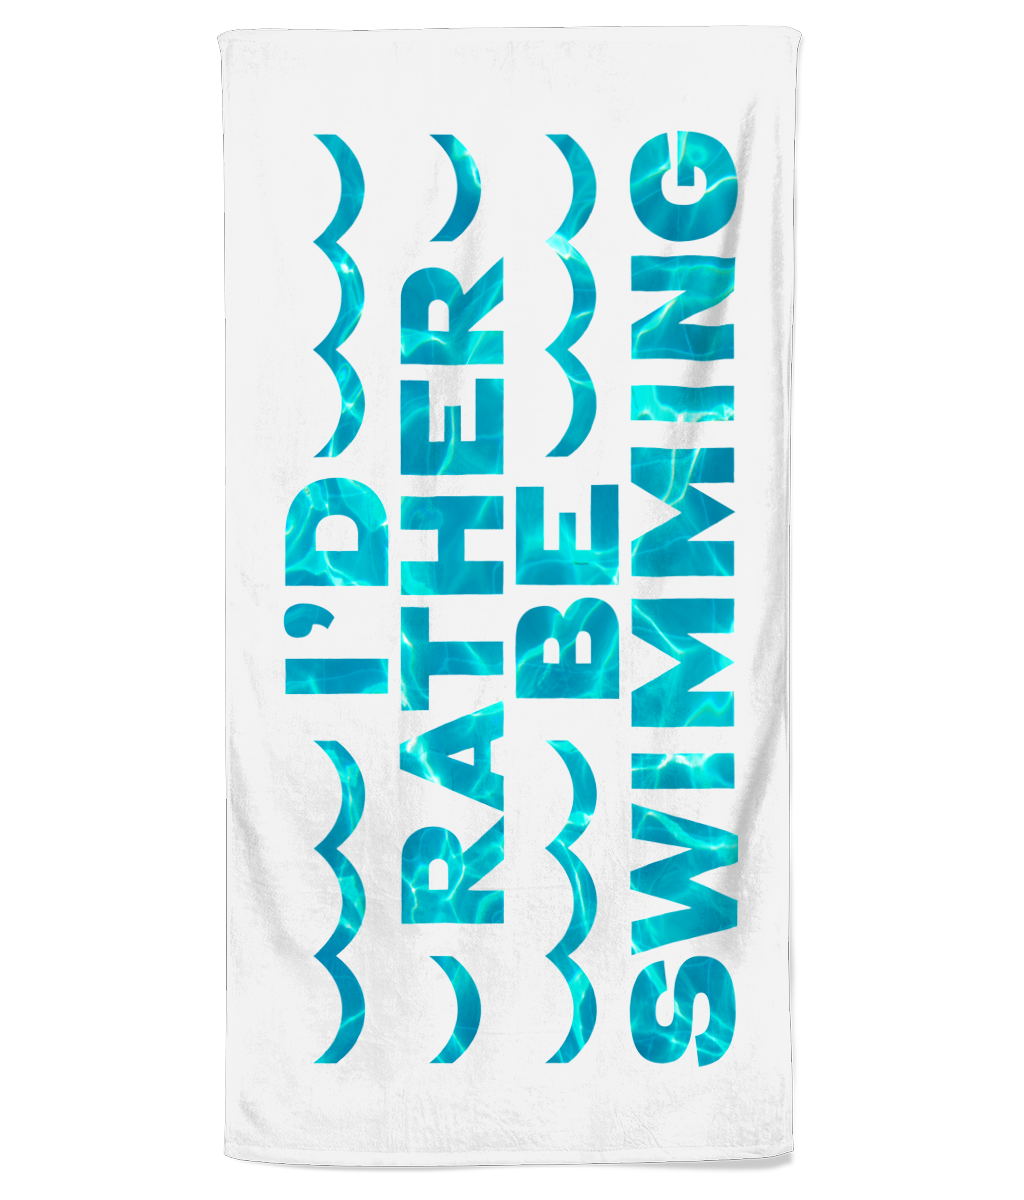 Beach Towel I'D RATHER BE SWIMMING beach-towel-template-300ppi